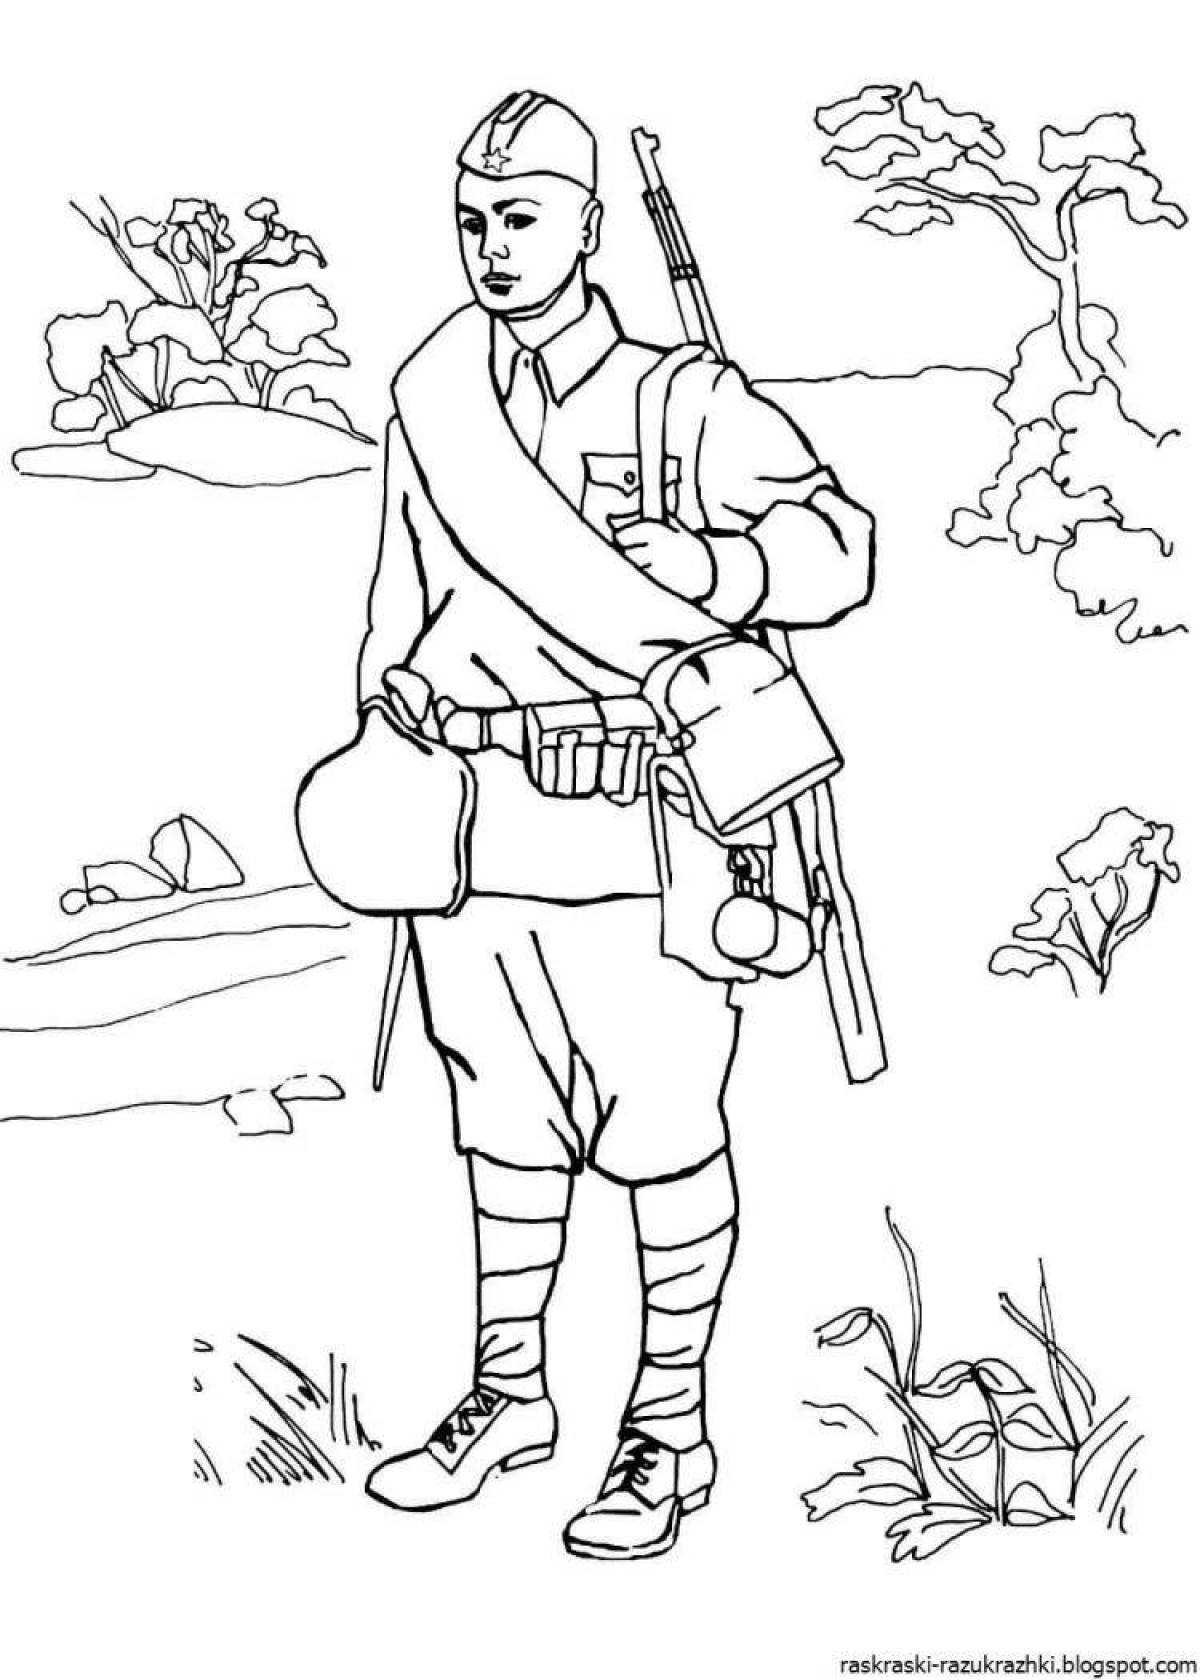 Fun toy soldier coloring book for 3-4 year olds